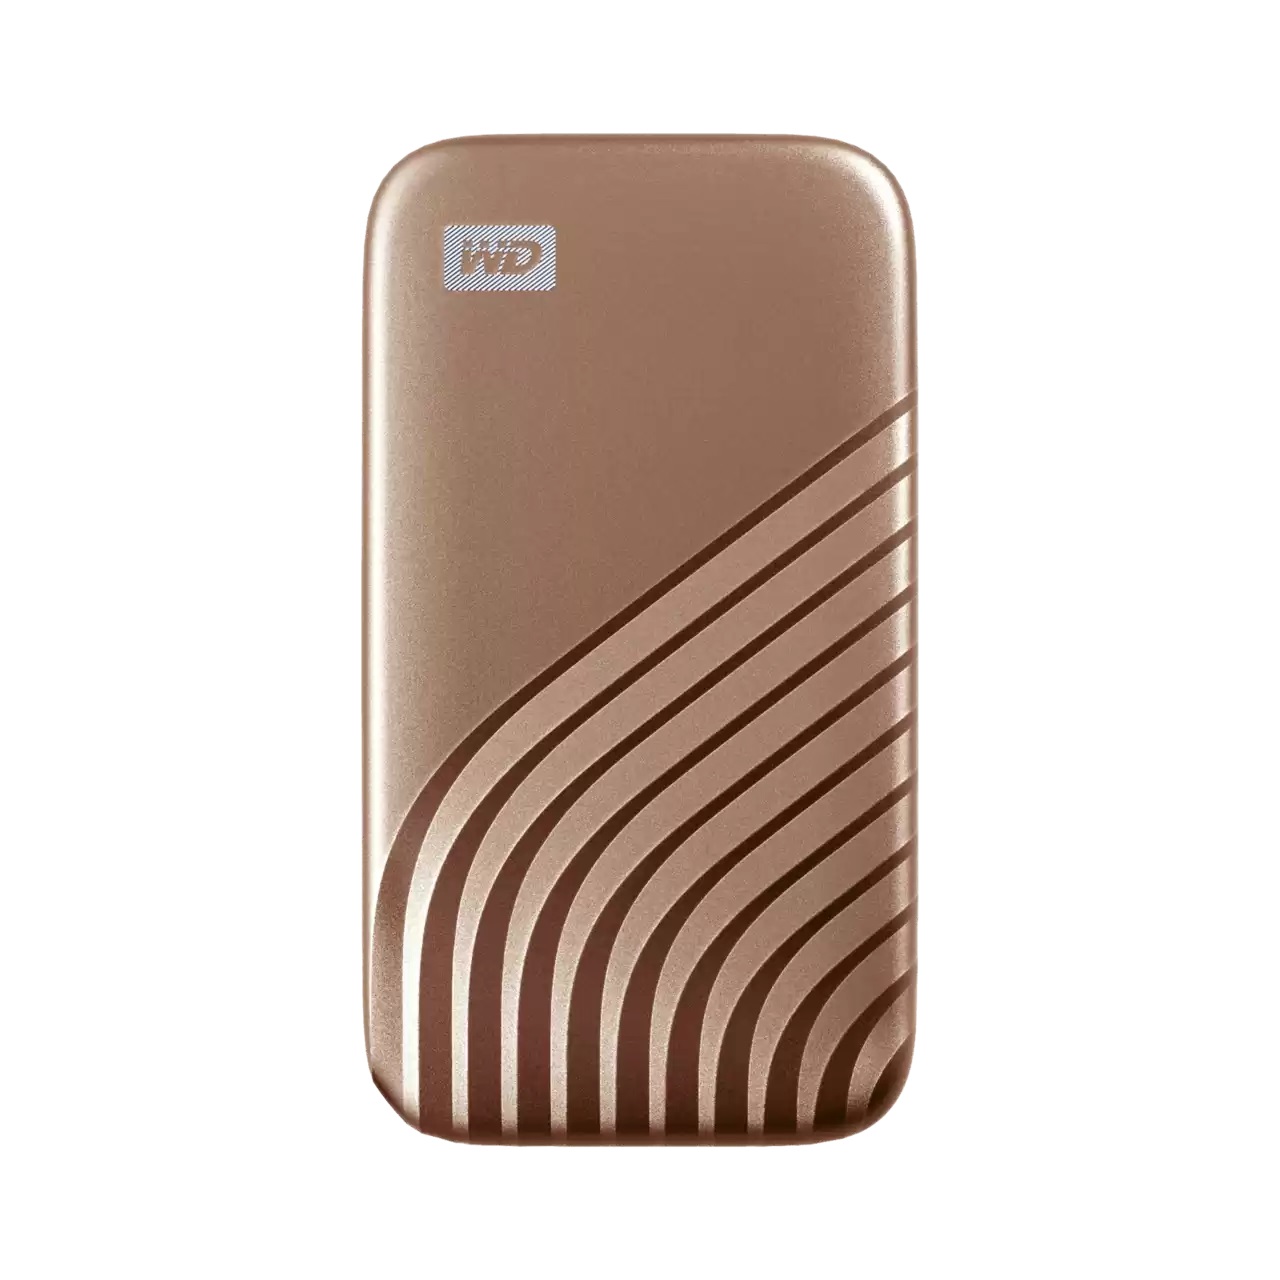 WD My Passport SSD, 1TB, Gold color, USB 3.2 Gen-2, Type C & Type A compatible, 1050MB/s (Read) and 1000MB/s (Write)